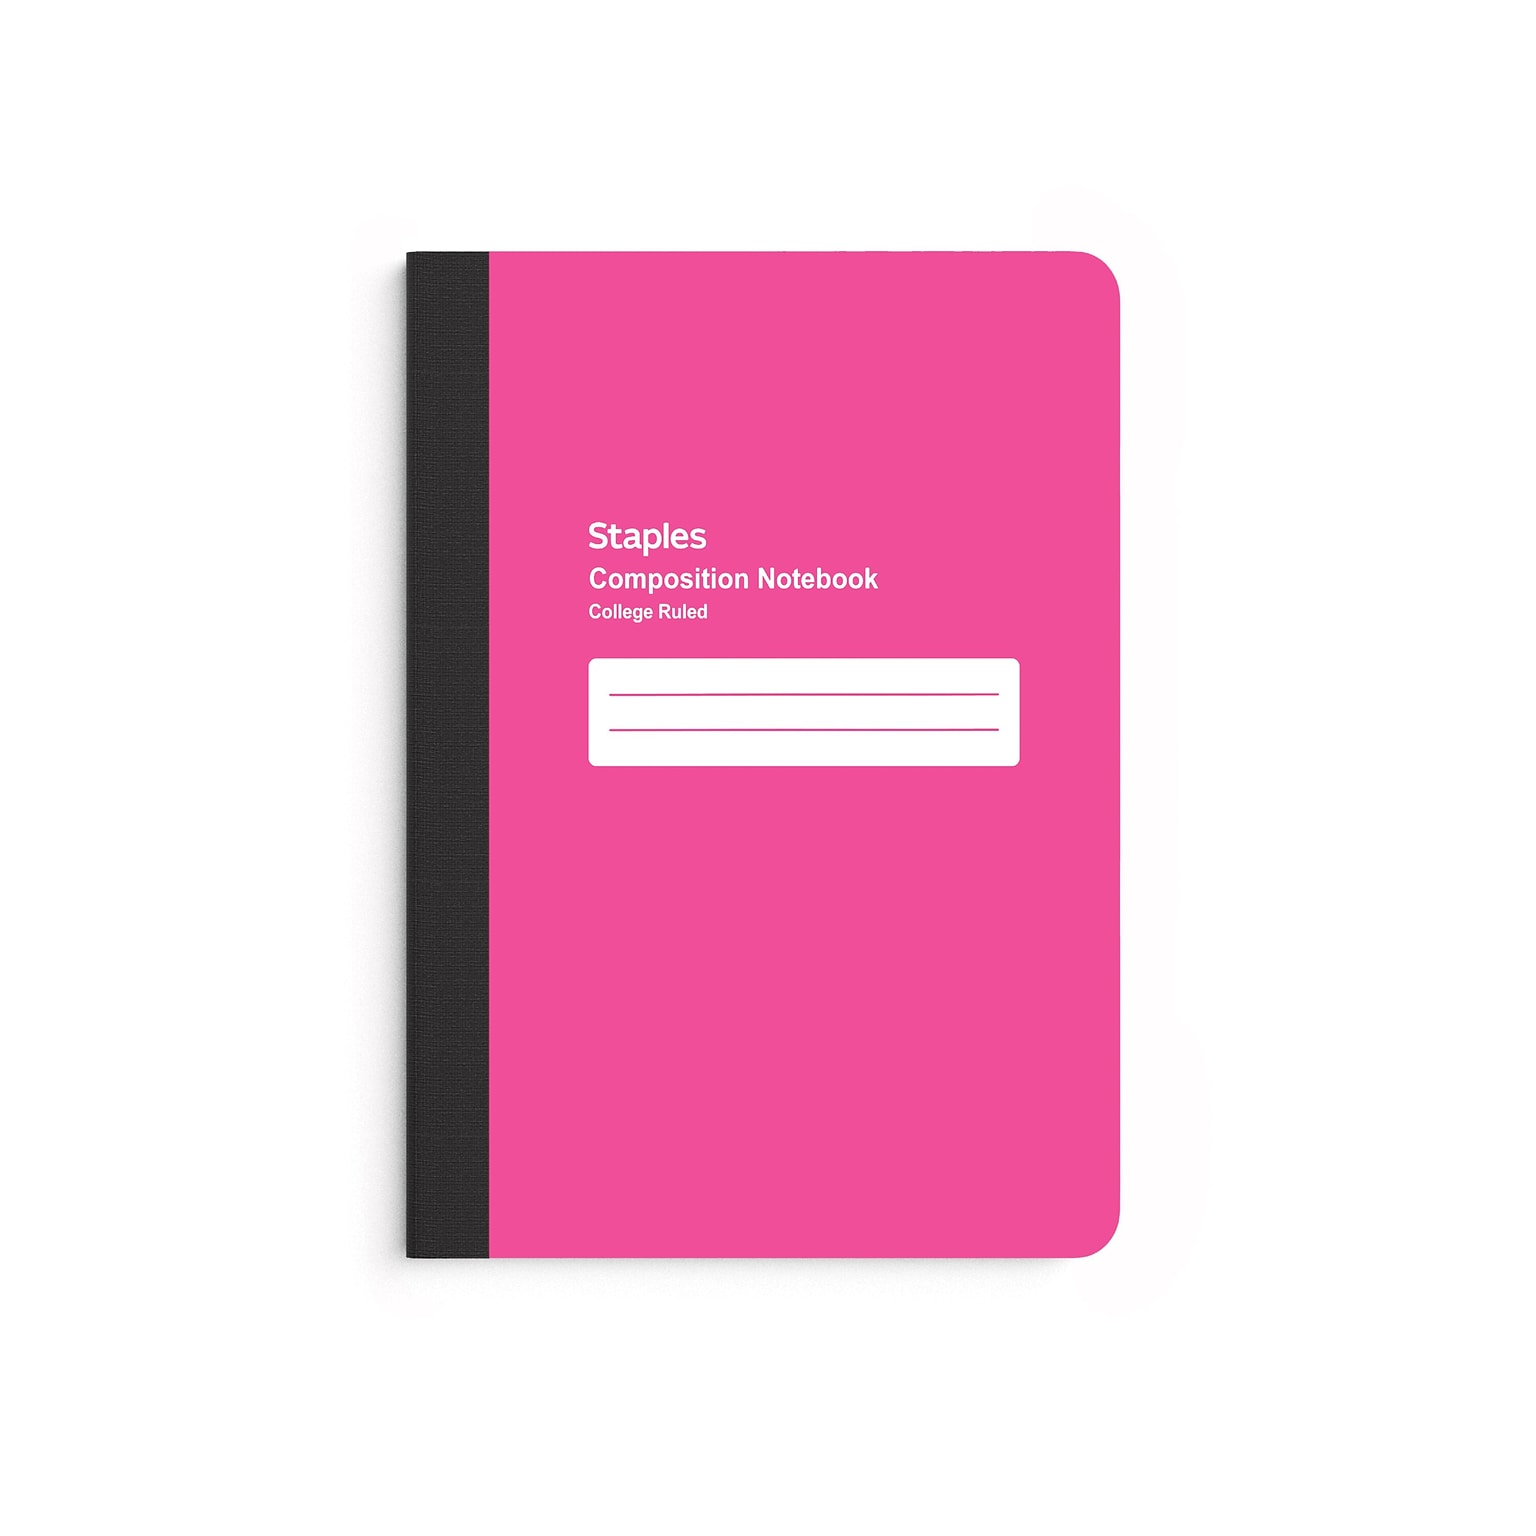 Staples Small Composition Notebook, 5 x 7, College Ruled, 80 Sheets, Pink (ST24491)